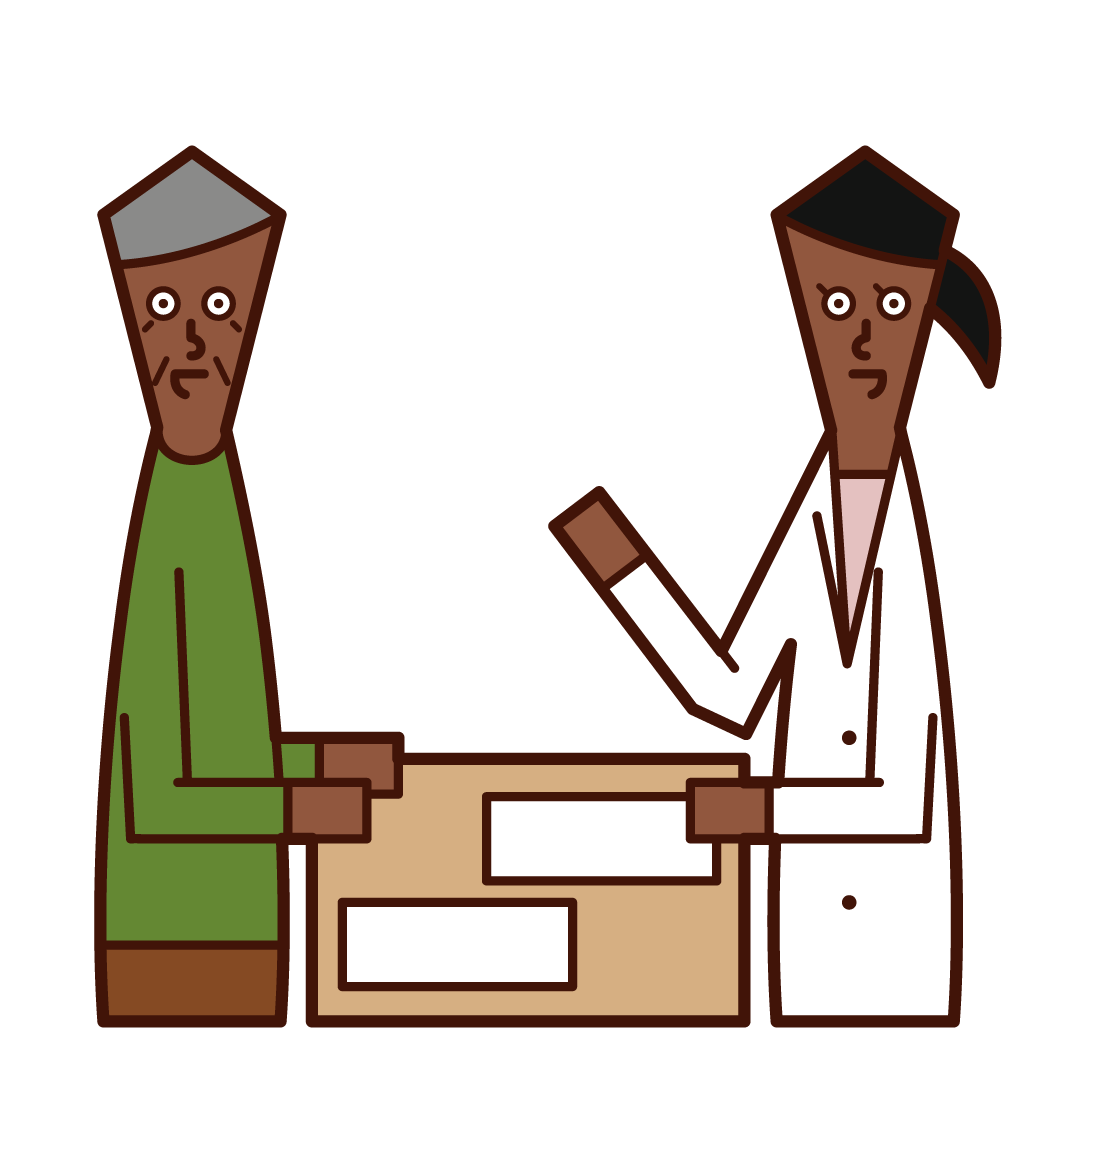 Illustration of a pharmacist (female) working in a pharmacy